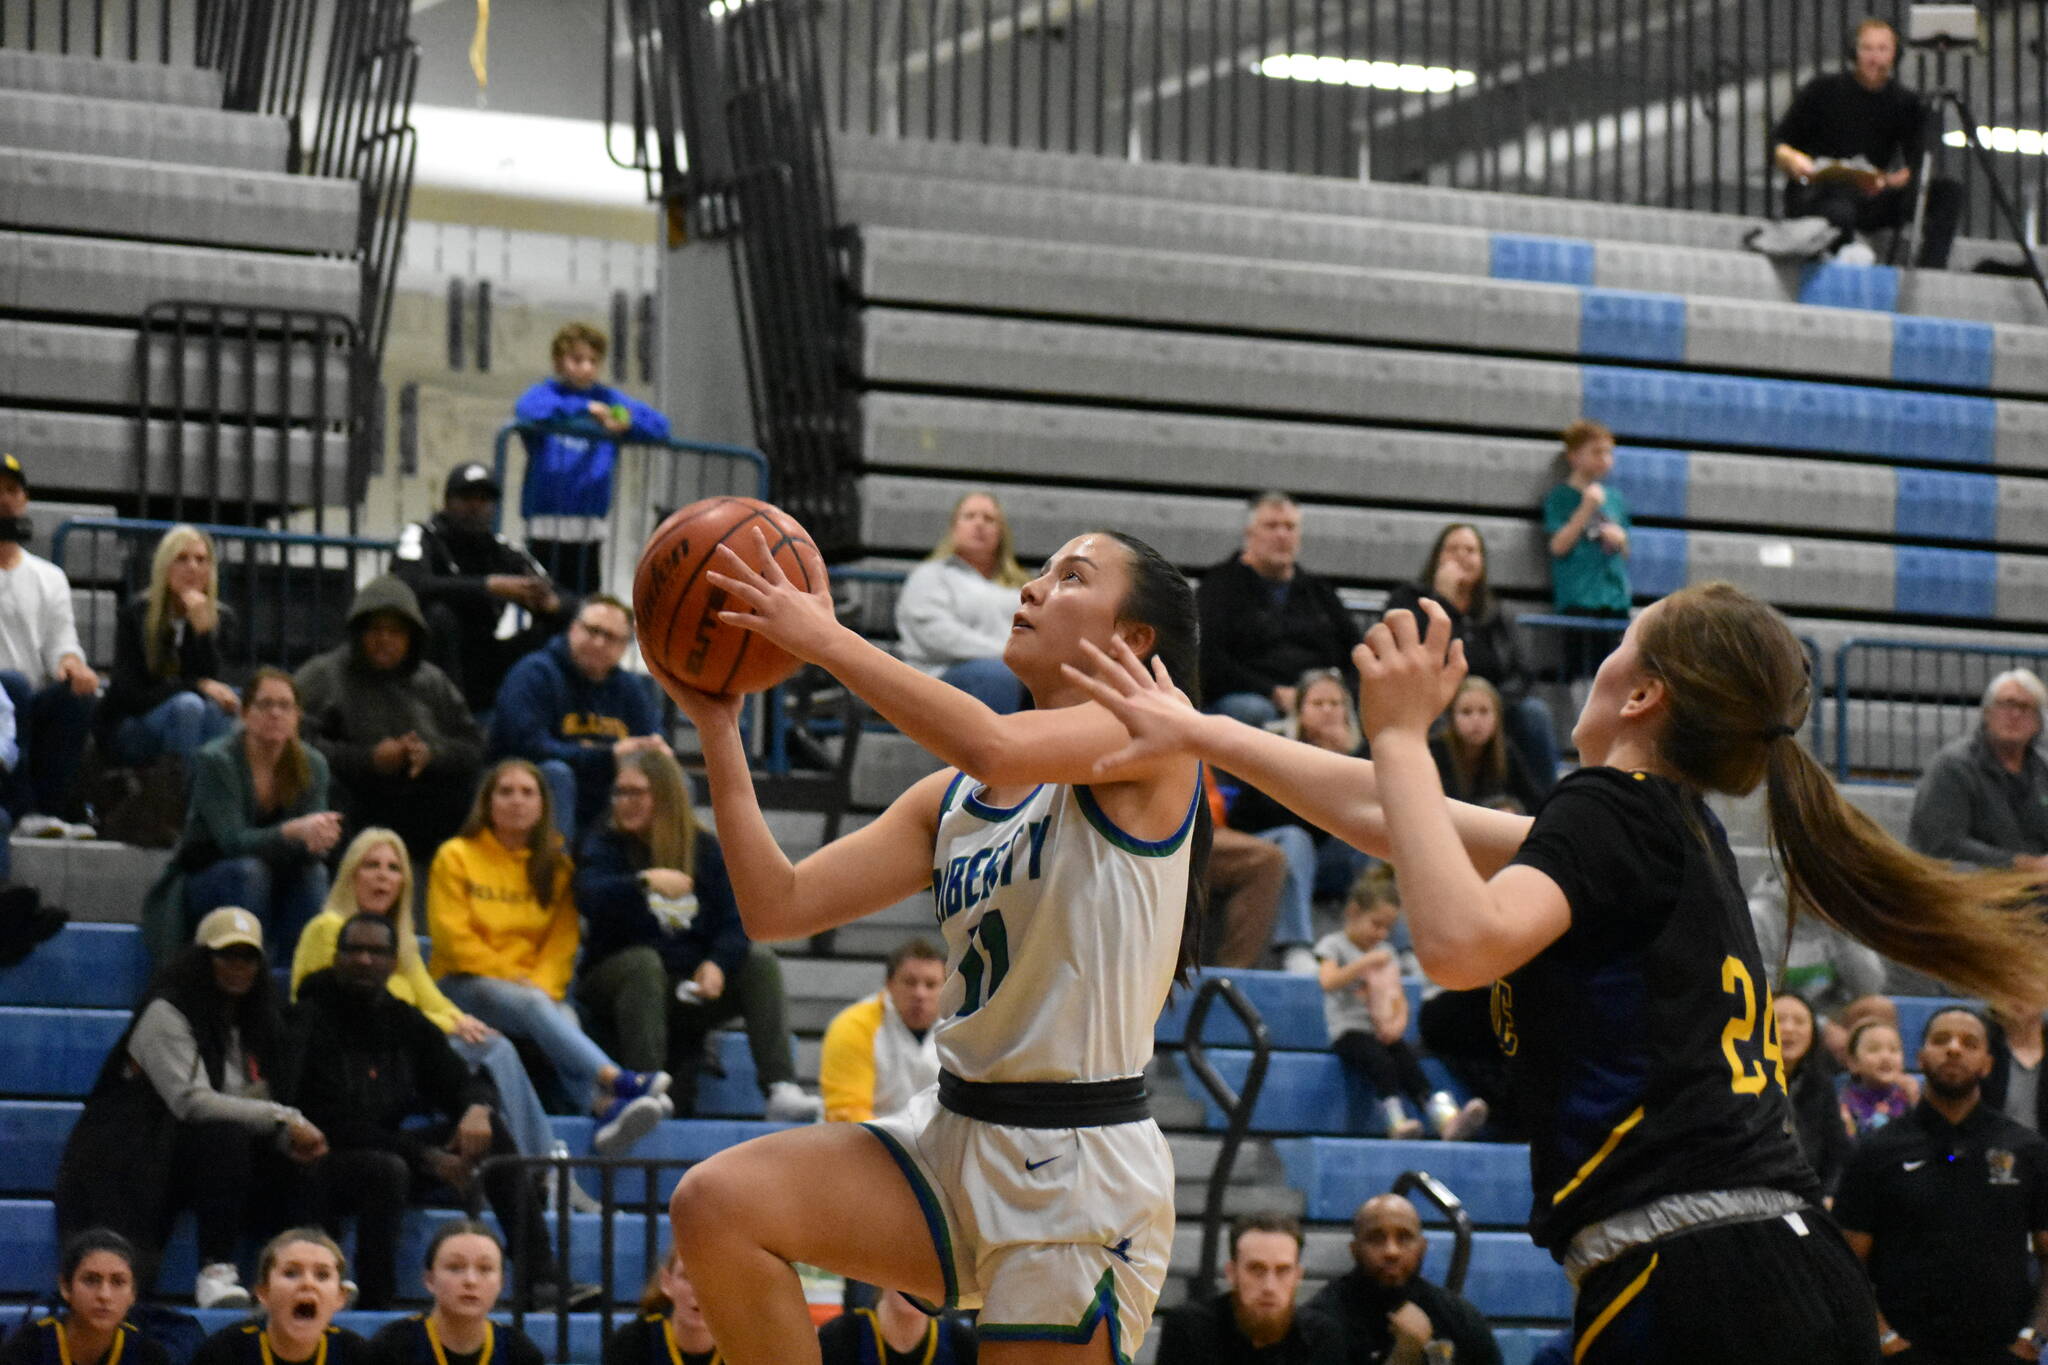 Senior Annabelle Le goes up for a layup against Bellevue. Ben Ray / The Reporter